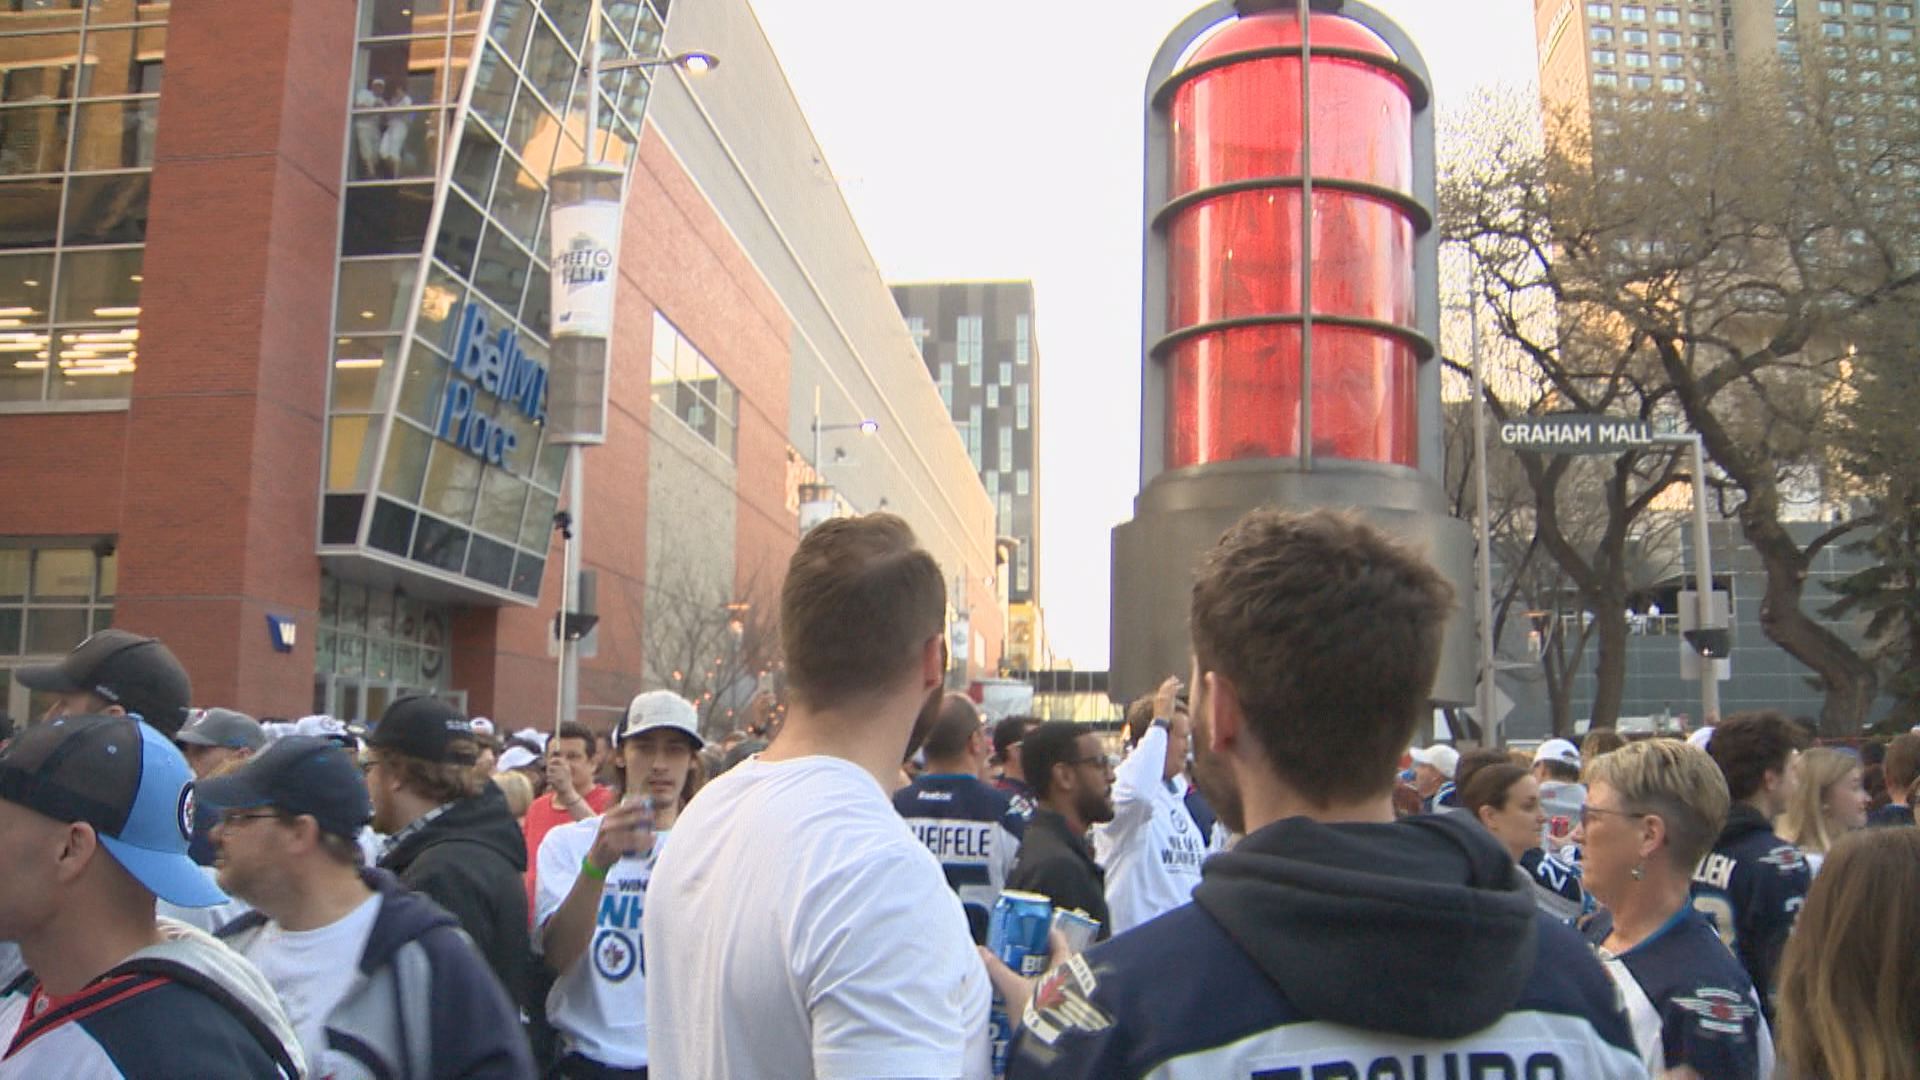 Jets fans, downtown restaurants eagerly awaiting Winnipeg whiteout party  details getting update Friday